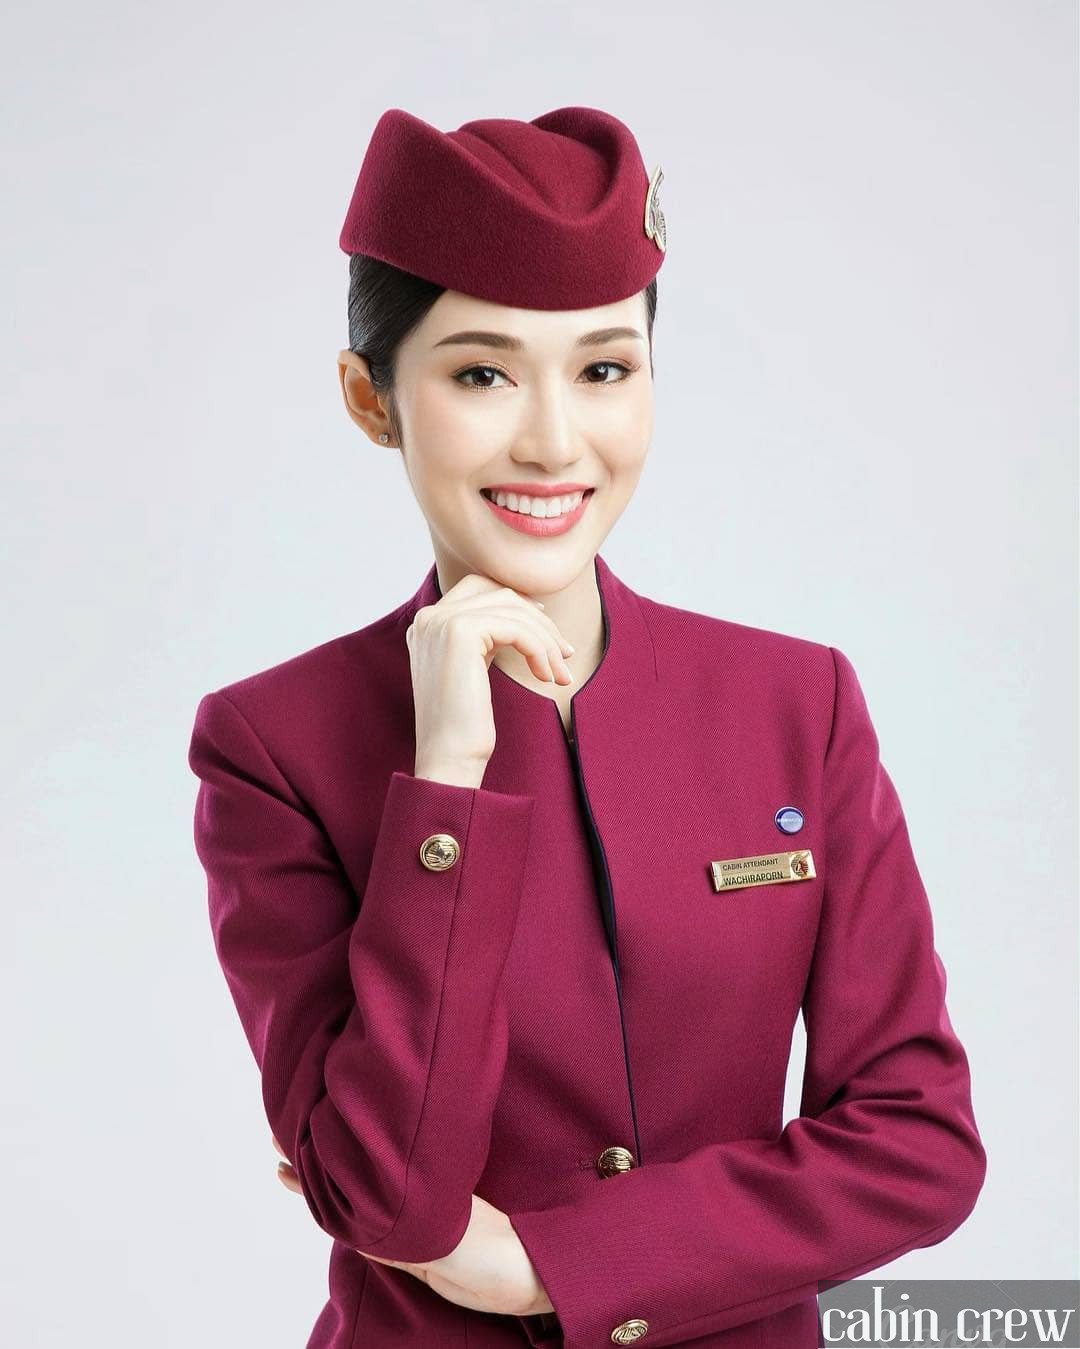 Qatar Airways Offers Exciting